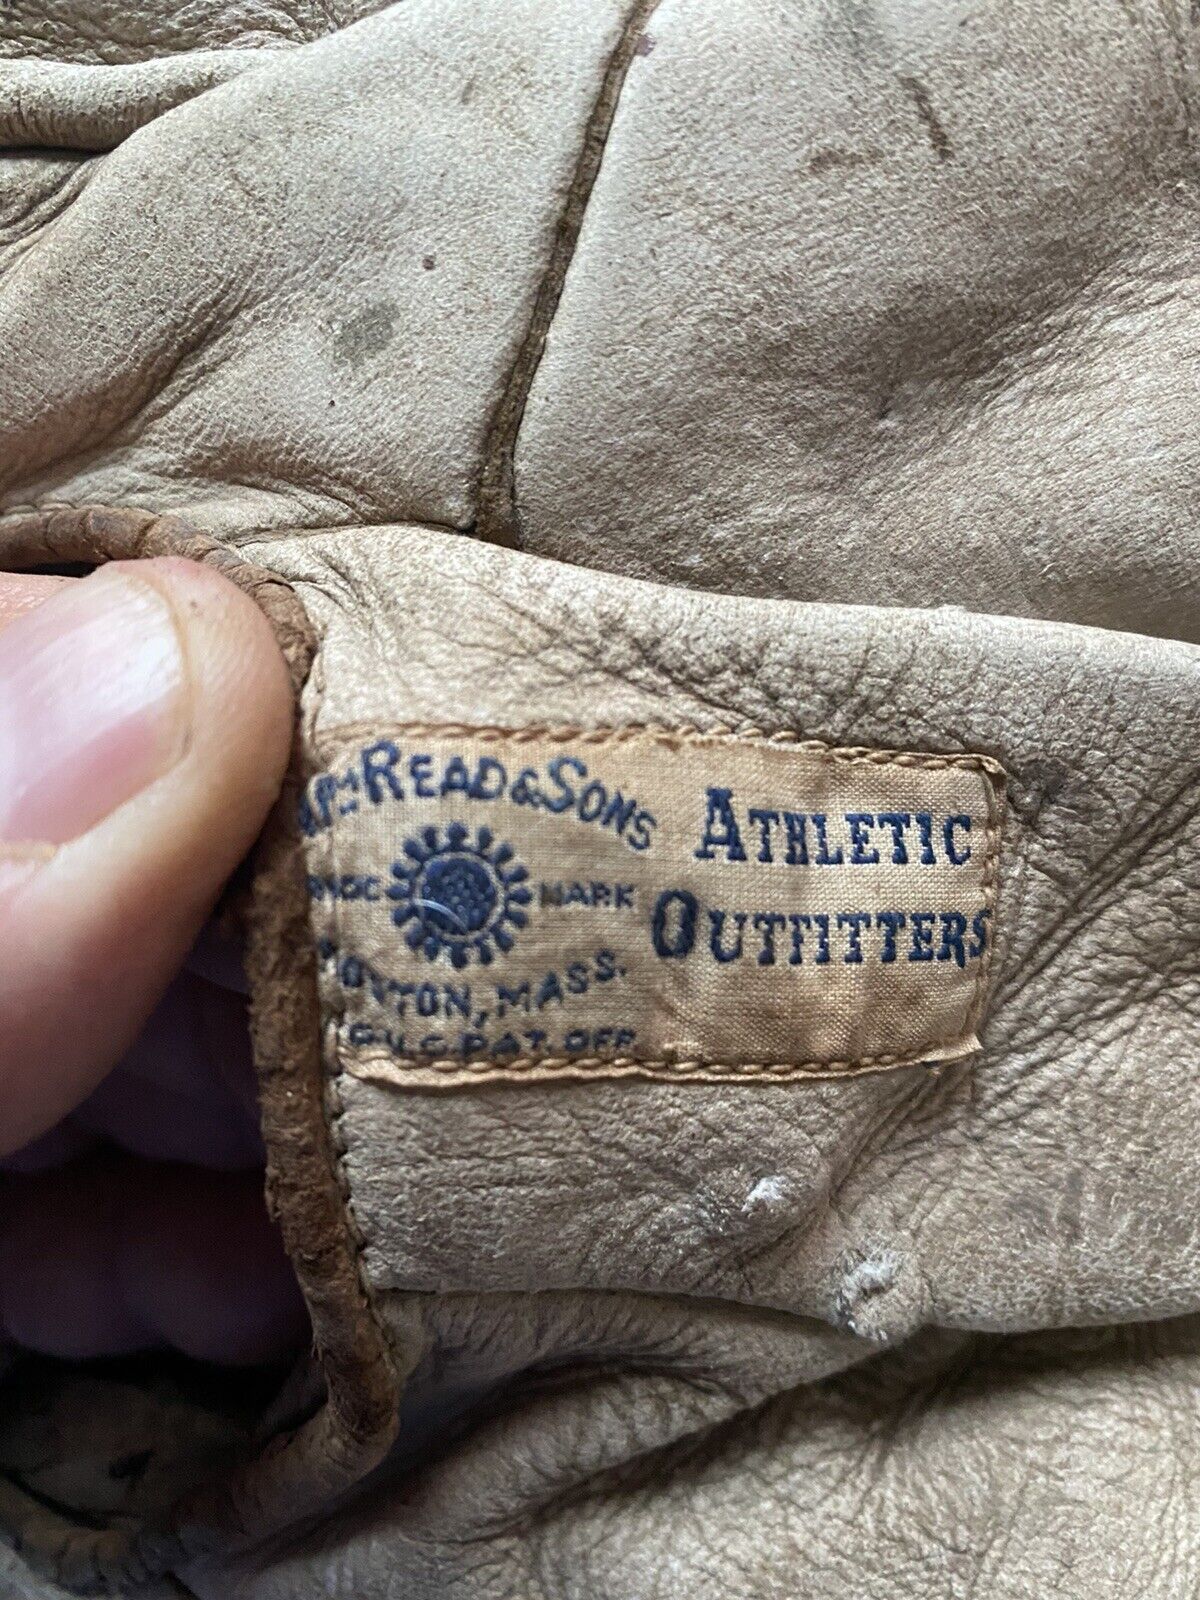 Uncommon William Read And Sons Baseball Glove. 1910-1920